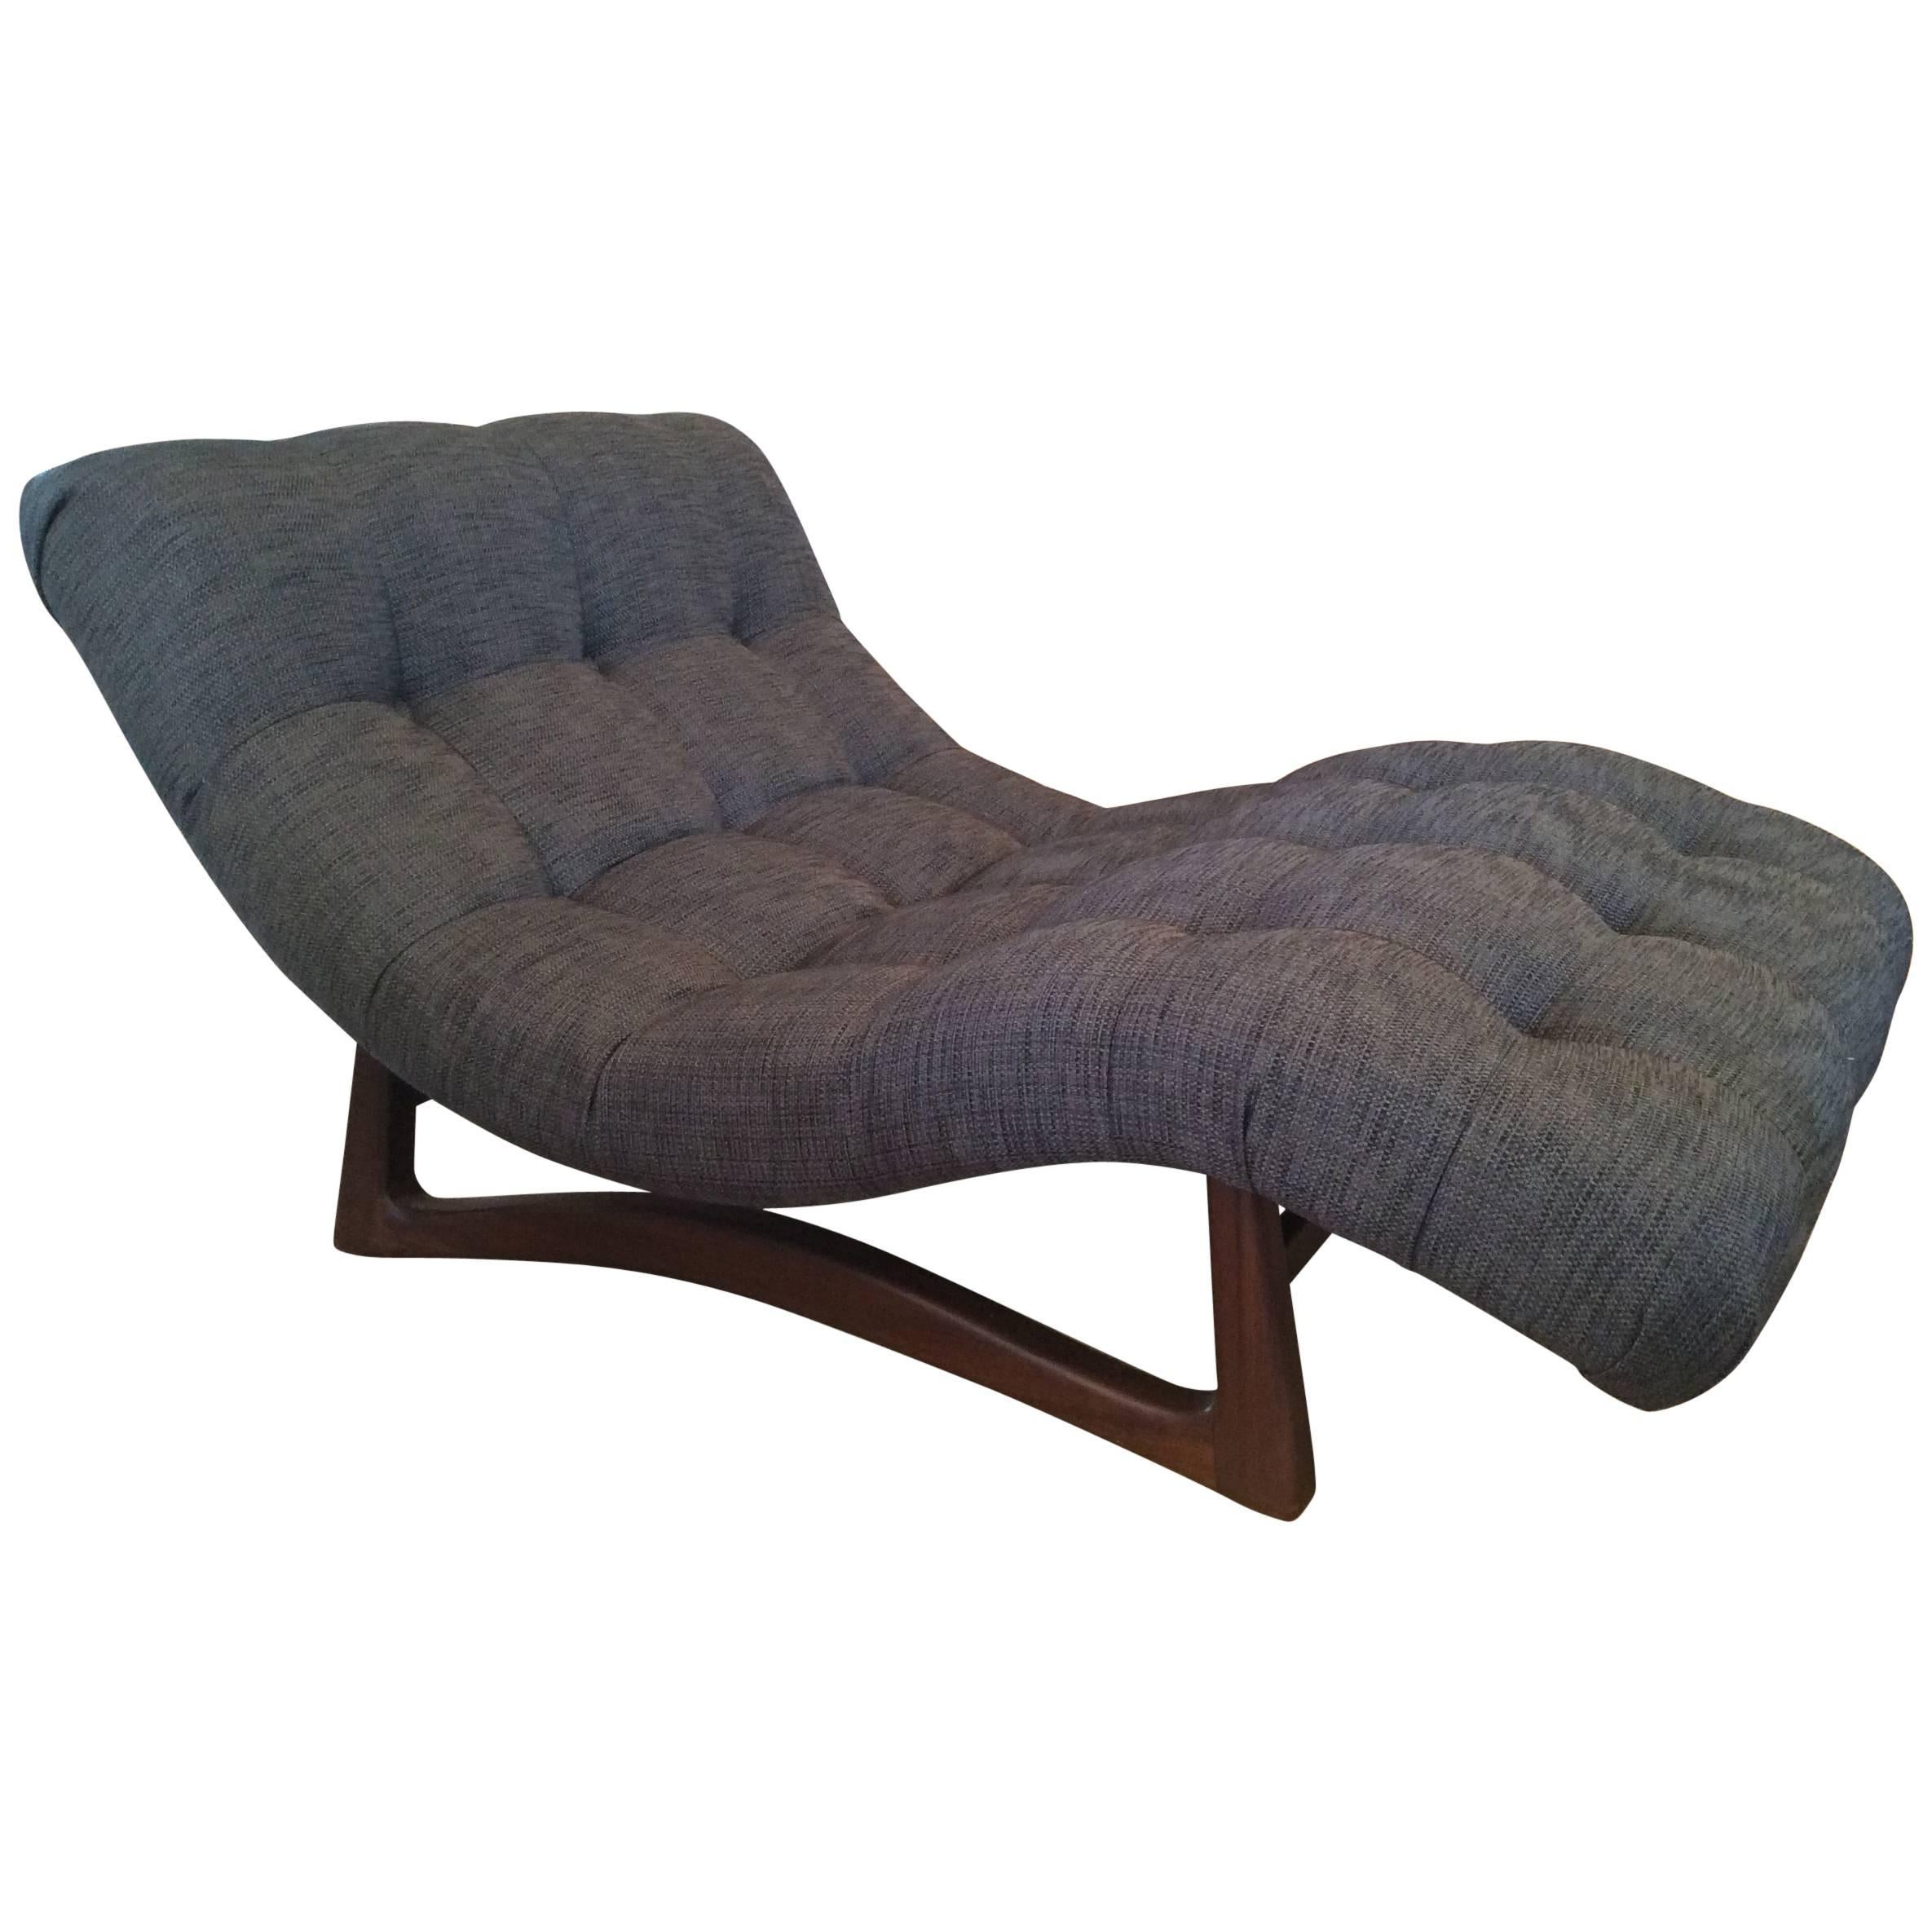 Vintage Adrian Pearsall Curved Chaise Lounge with Walnut Base